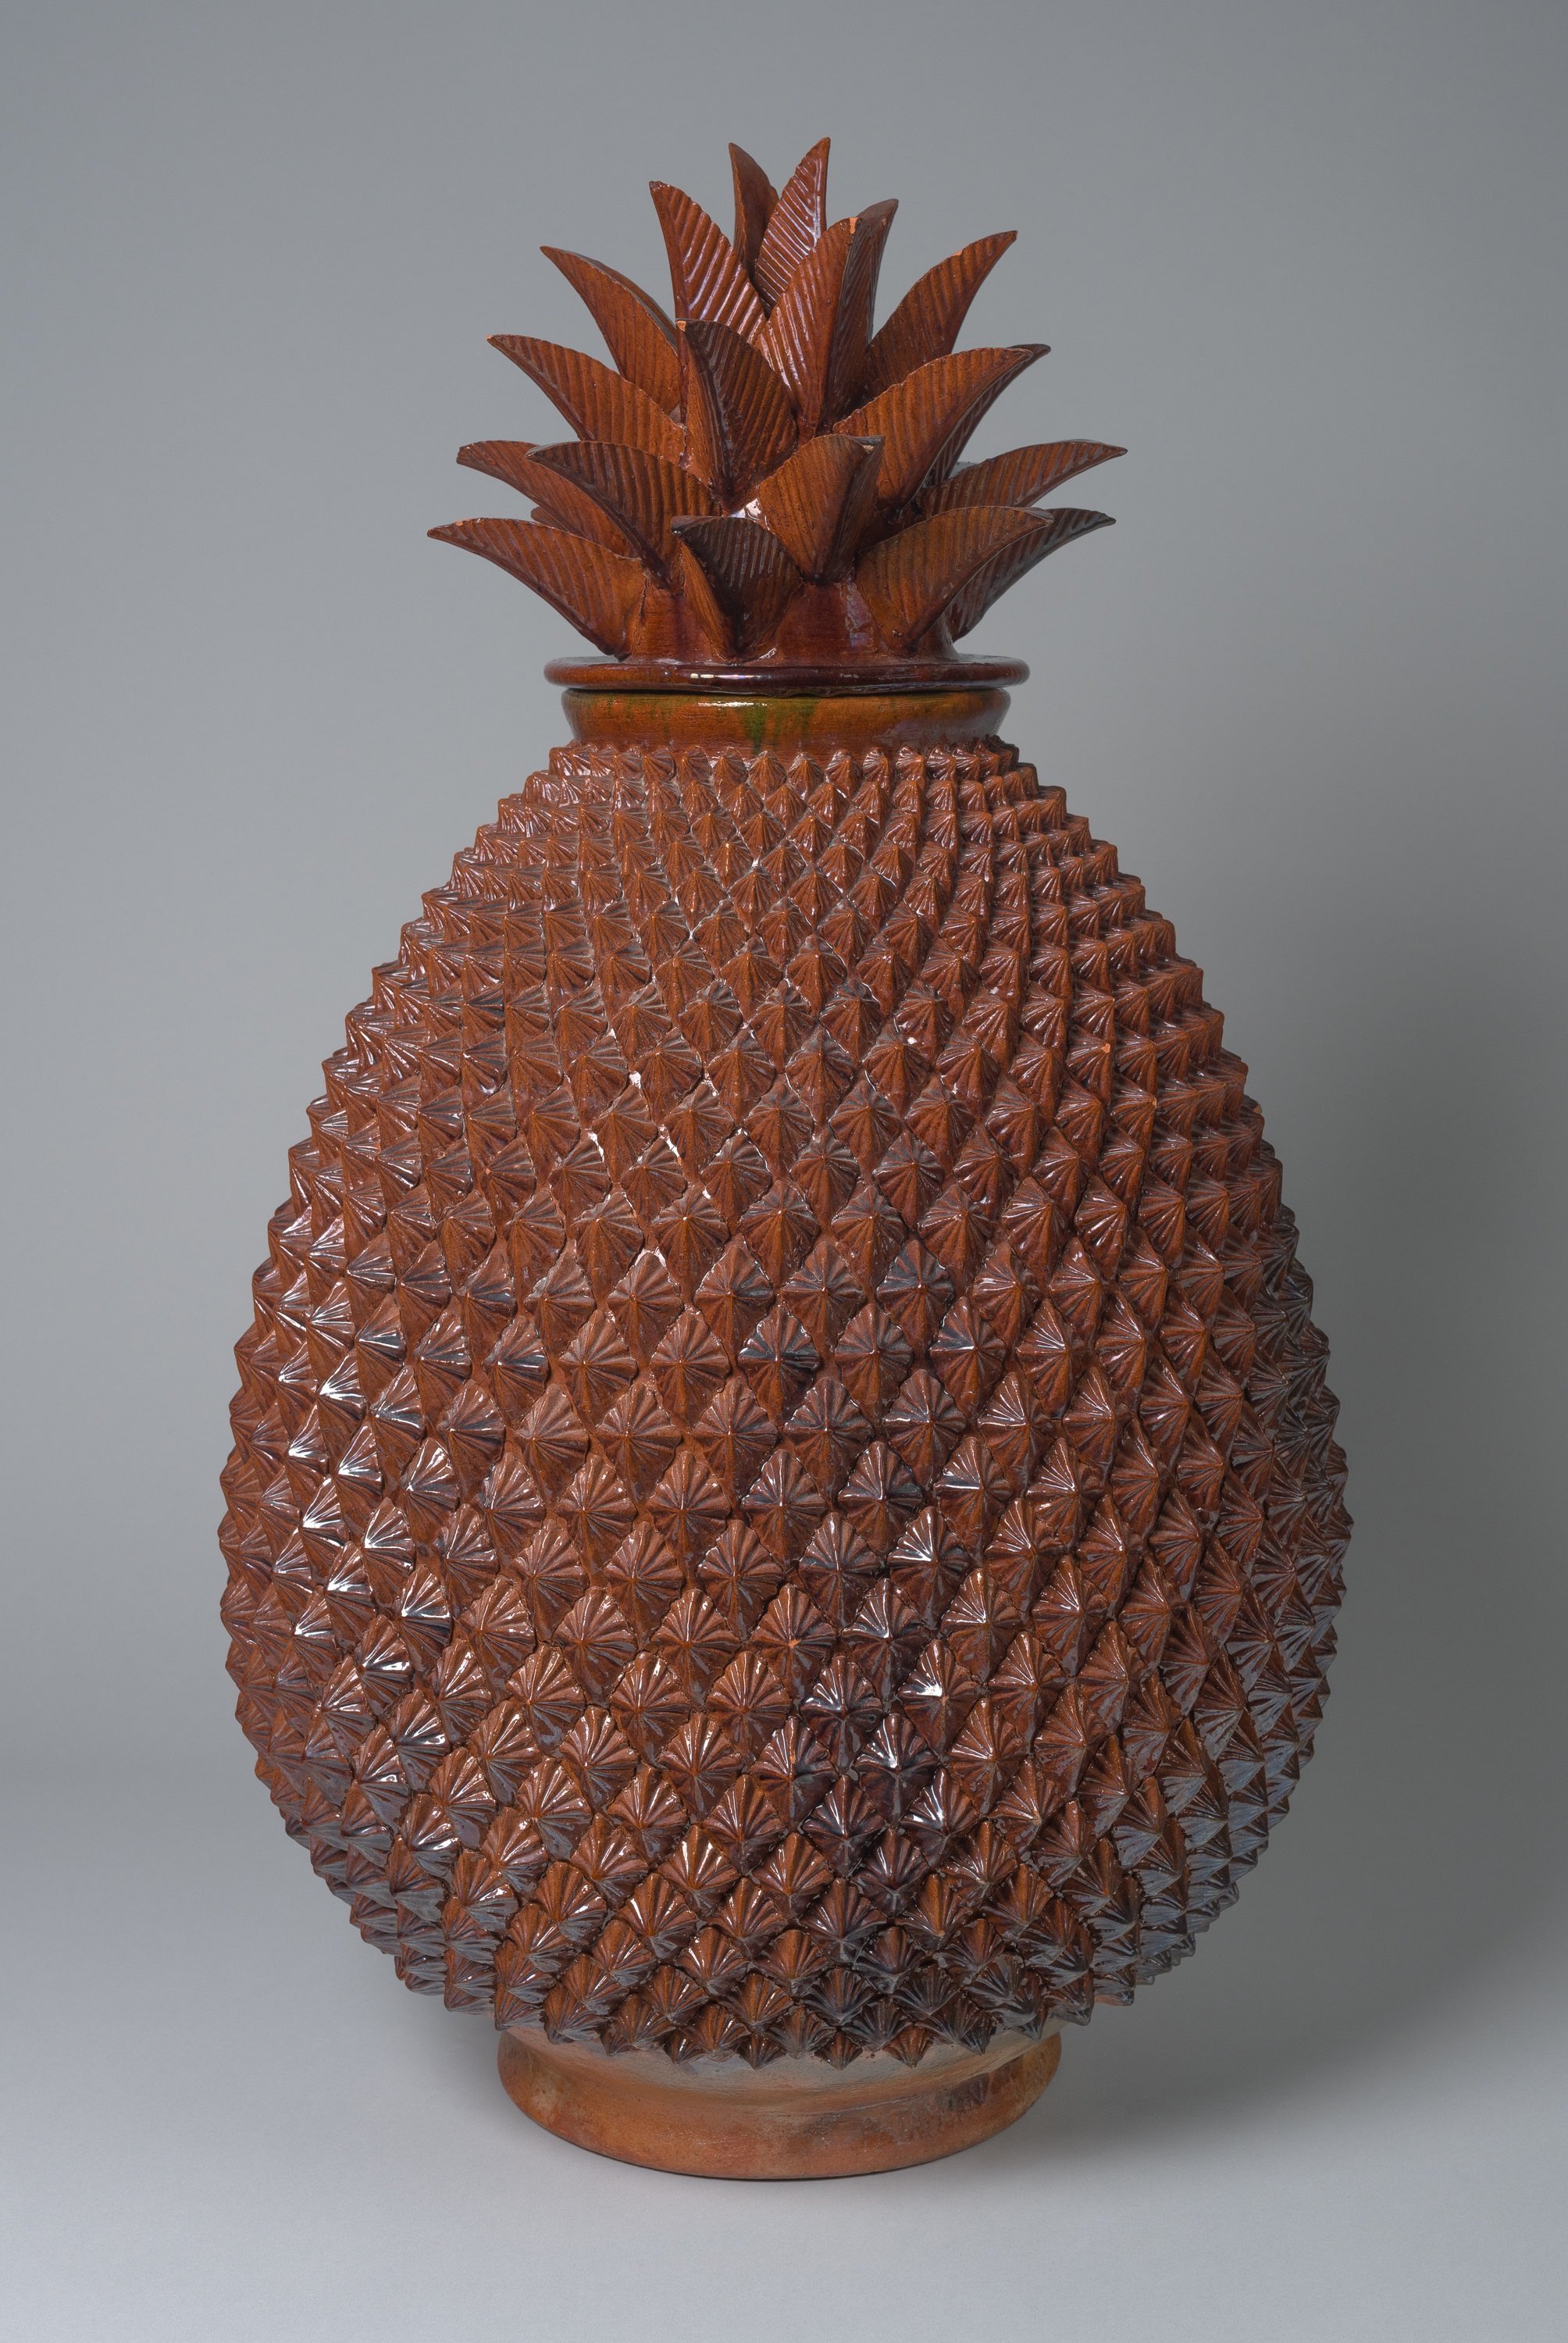 Water Jar in the form of a Pineapple